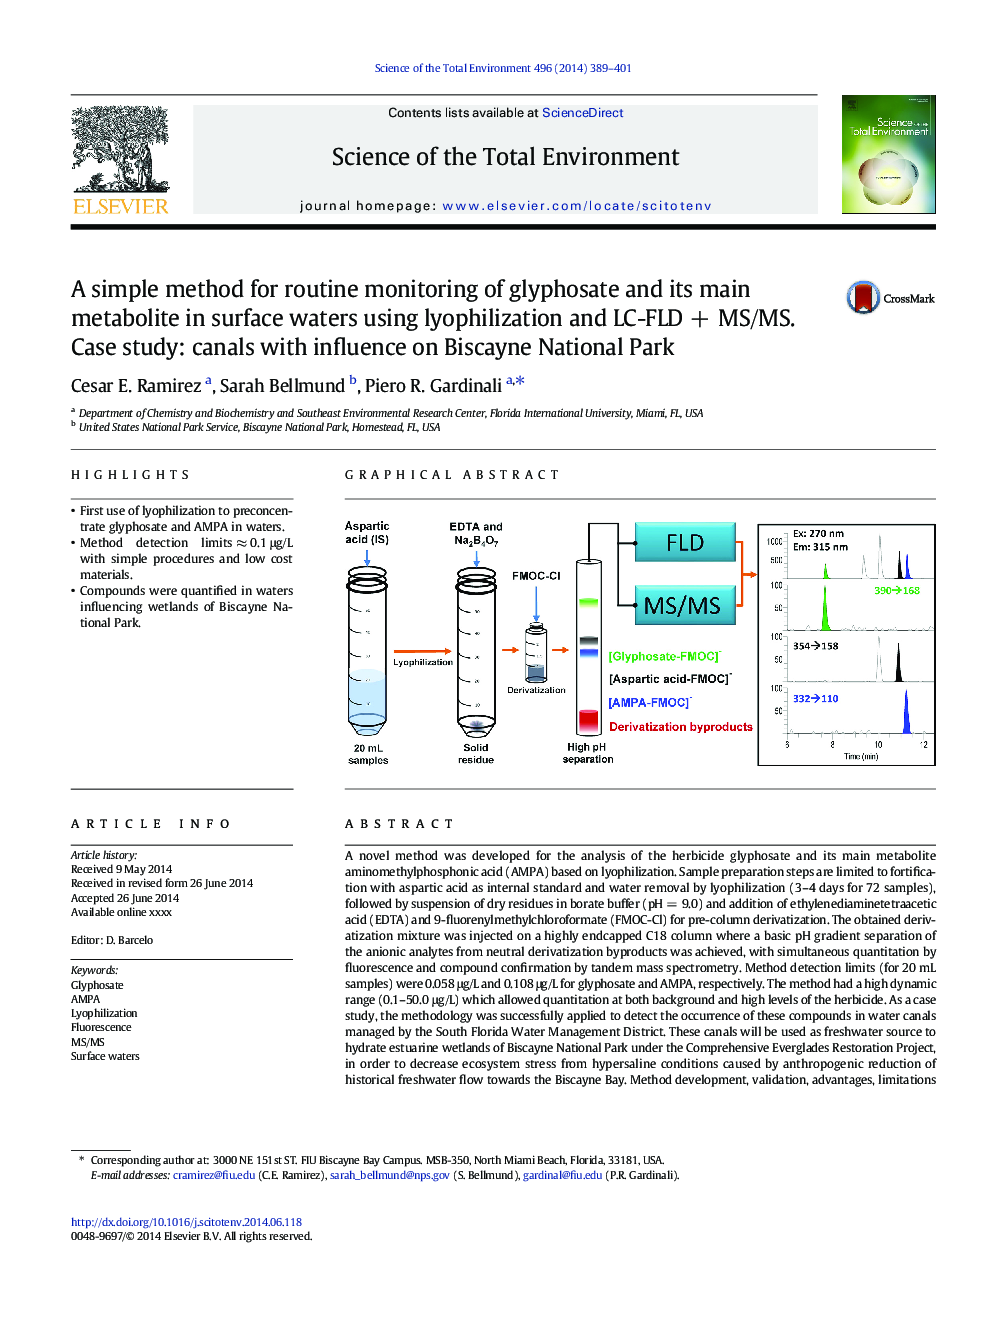 A simple method for routine monitoring of glyphosate and its main metabolite in surface waters using lyophilization and LC-FLDÂ +Â MS/MS. Case study: canals with influence on Biscayne National Park